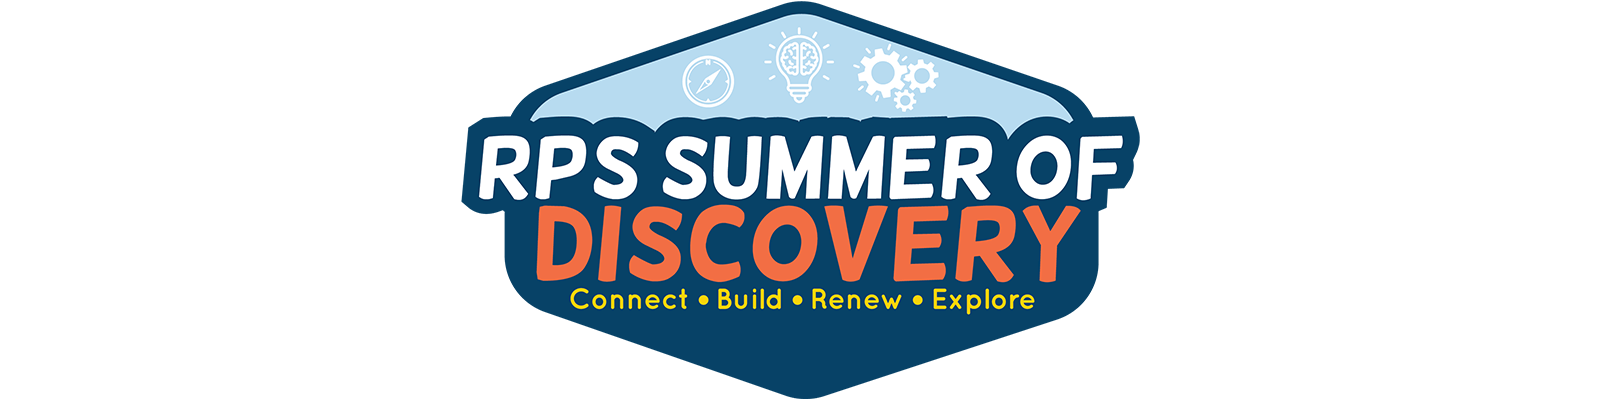 RPS Summer of Discovery Logo Header